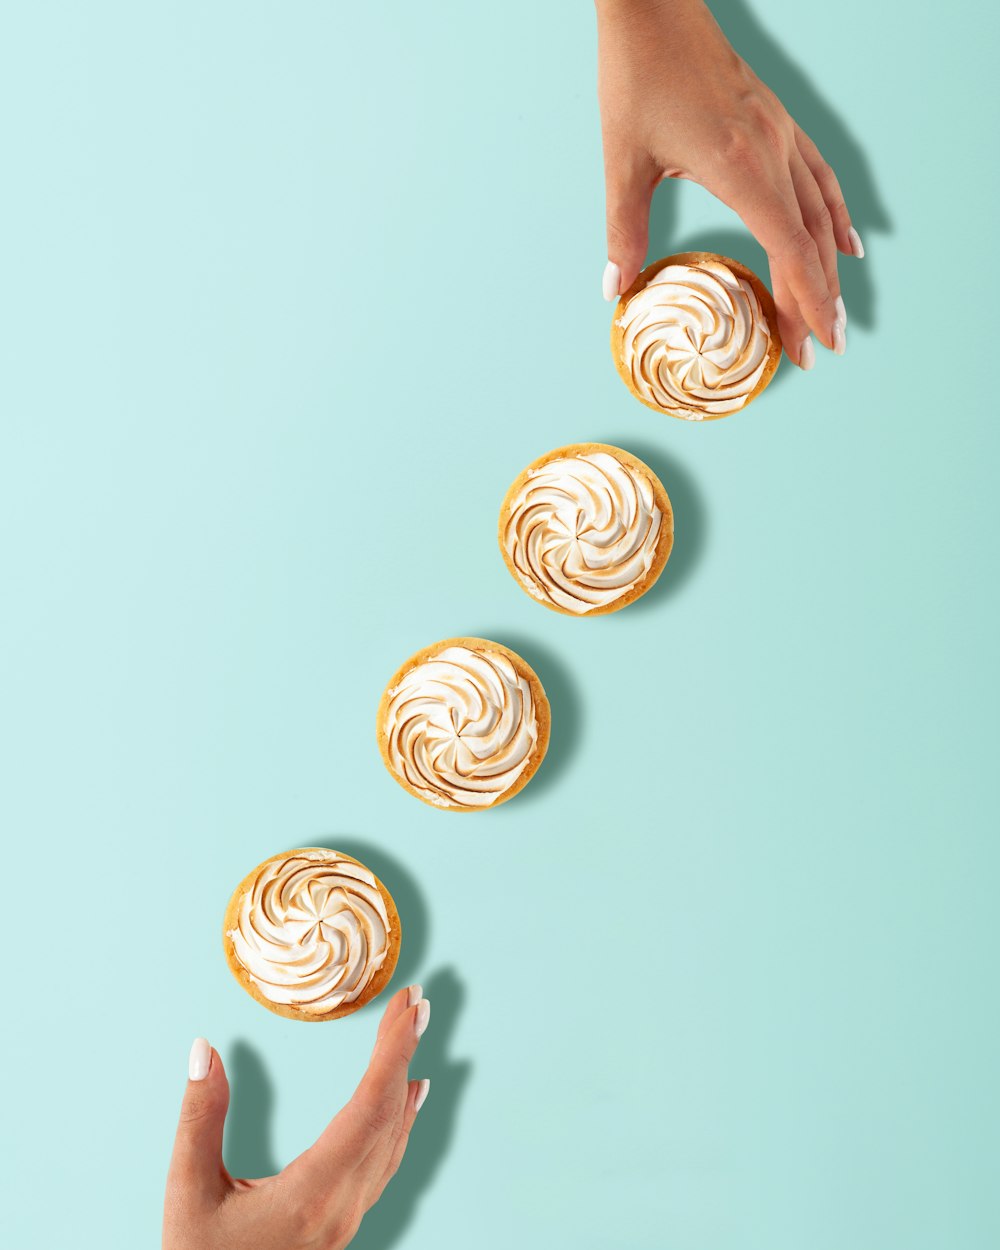 a woman's hands reaching for a pastry on a blue background